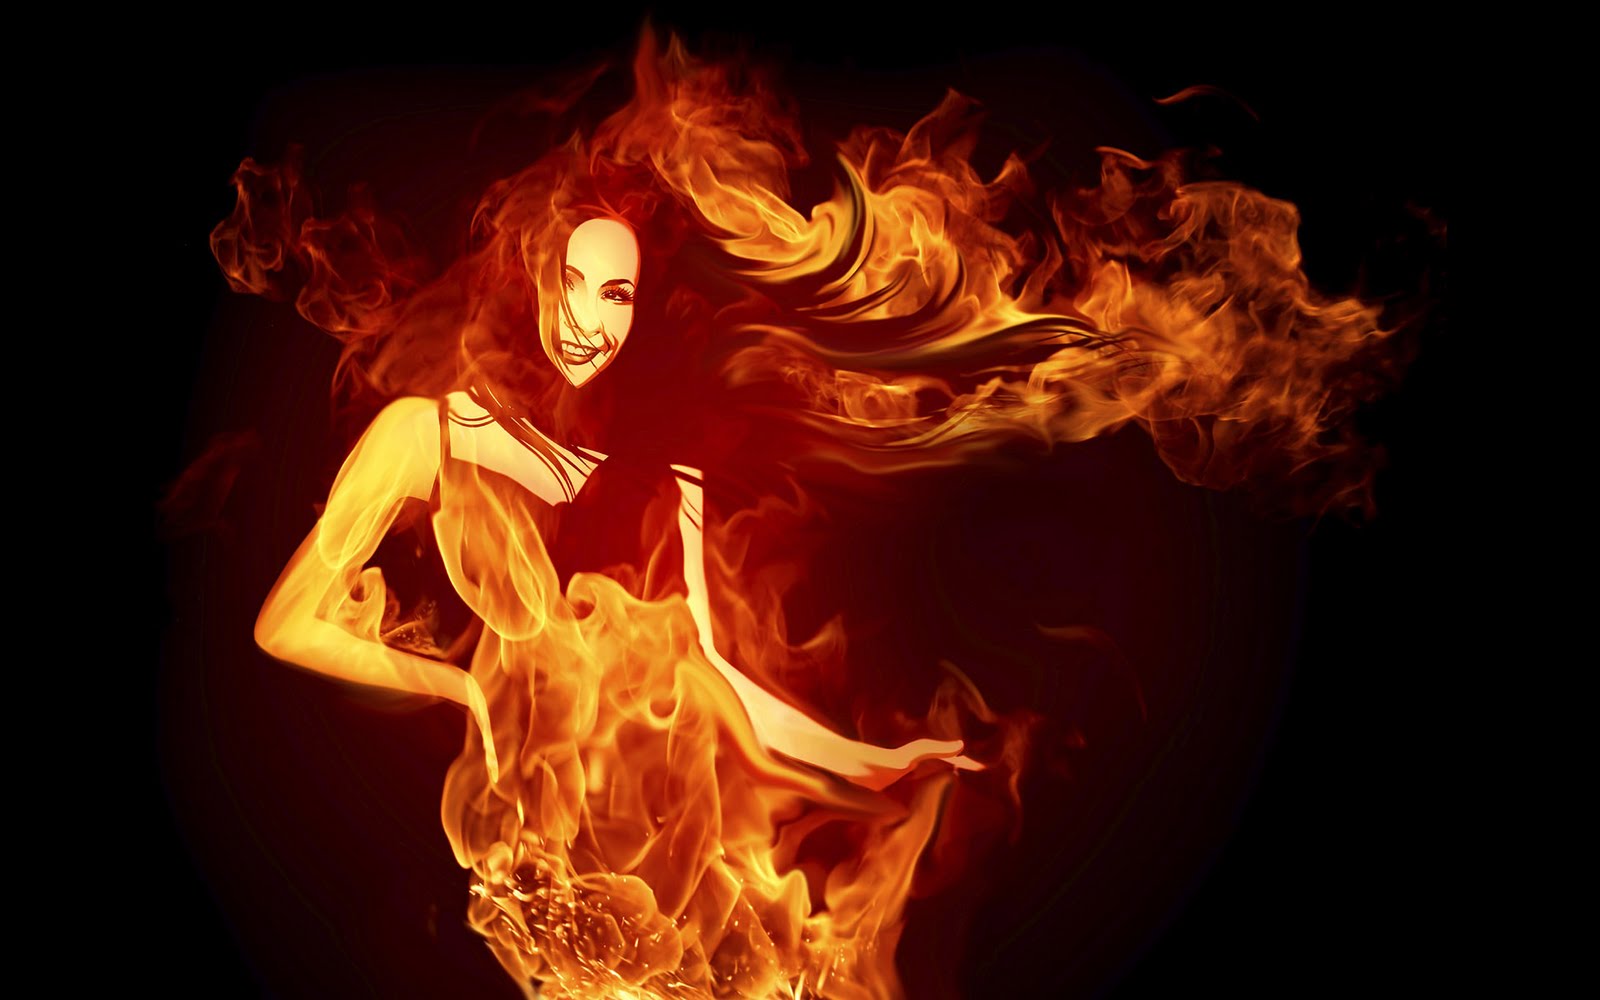 Wallpapers Guitar Woman Dark Hd With A Made Of Fire 1600x1000